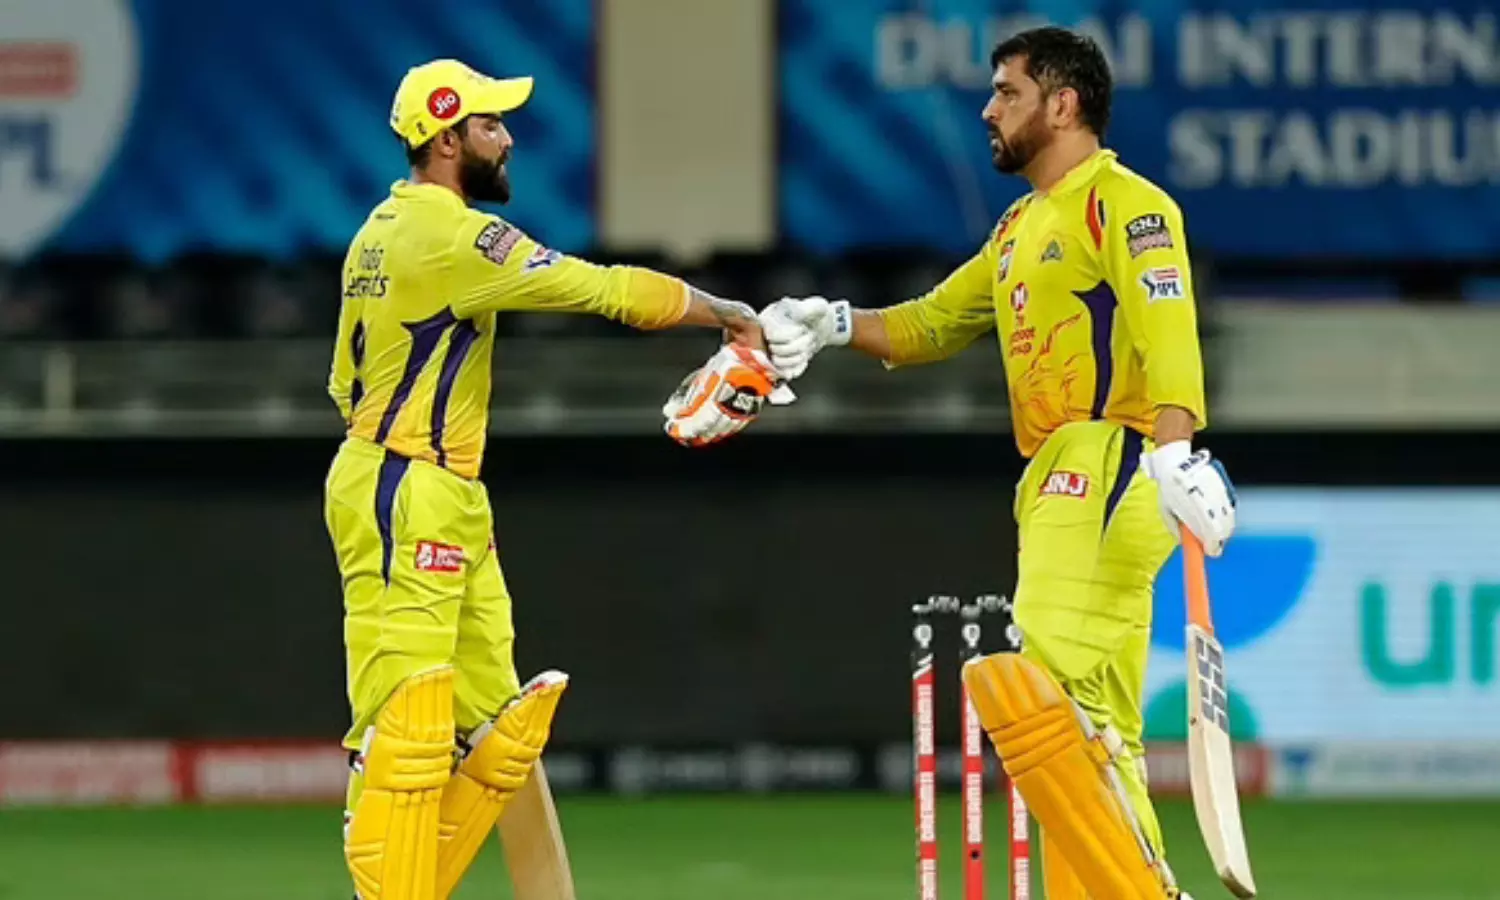 MS Dhoni Gives CSK's Captaincy to Jadeja